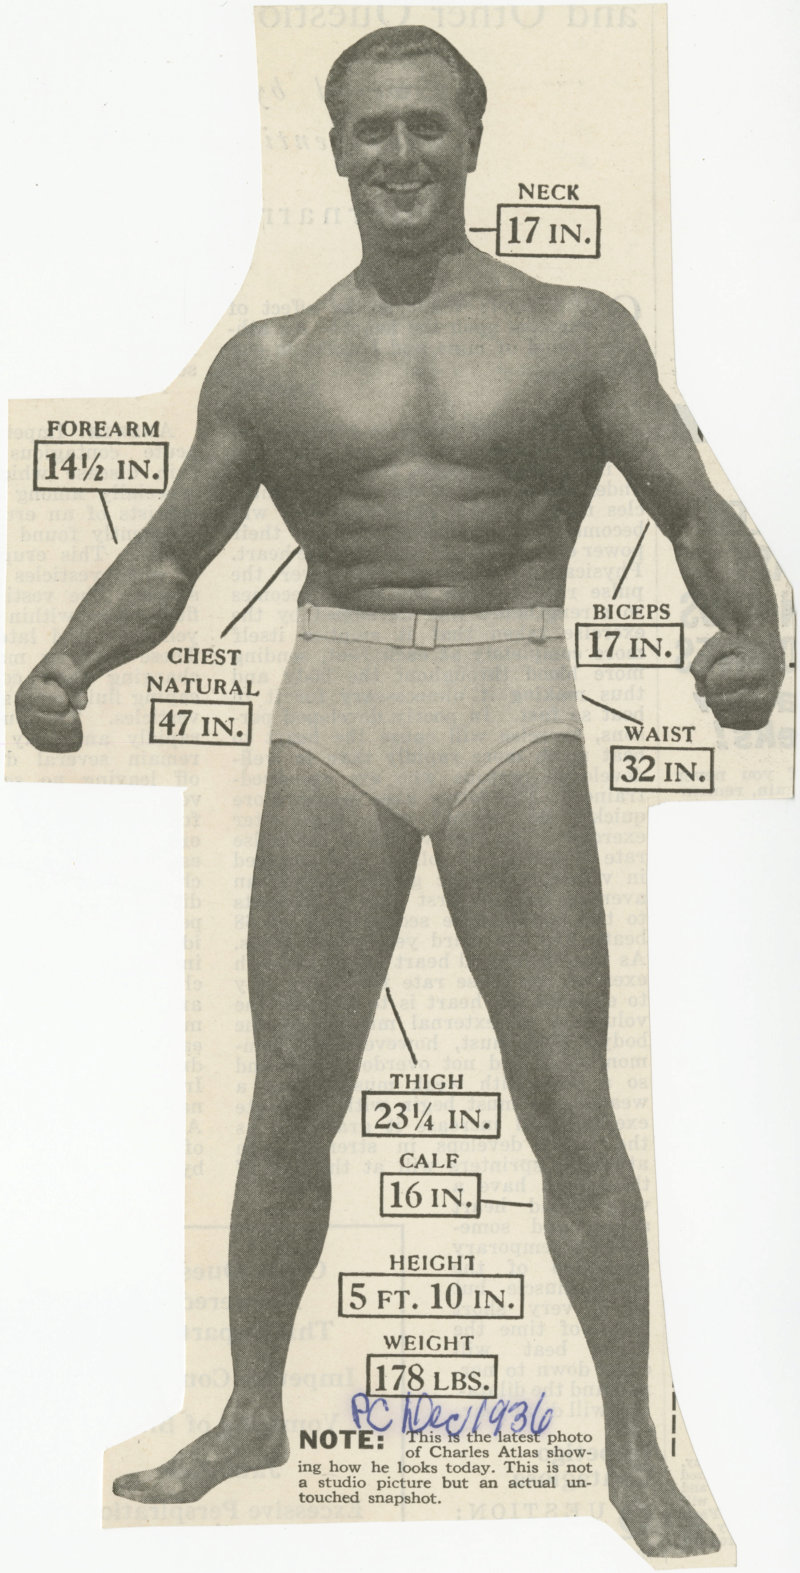 Latest Photo of Charles Atlas Showing How He Looks Today